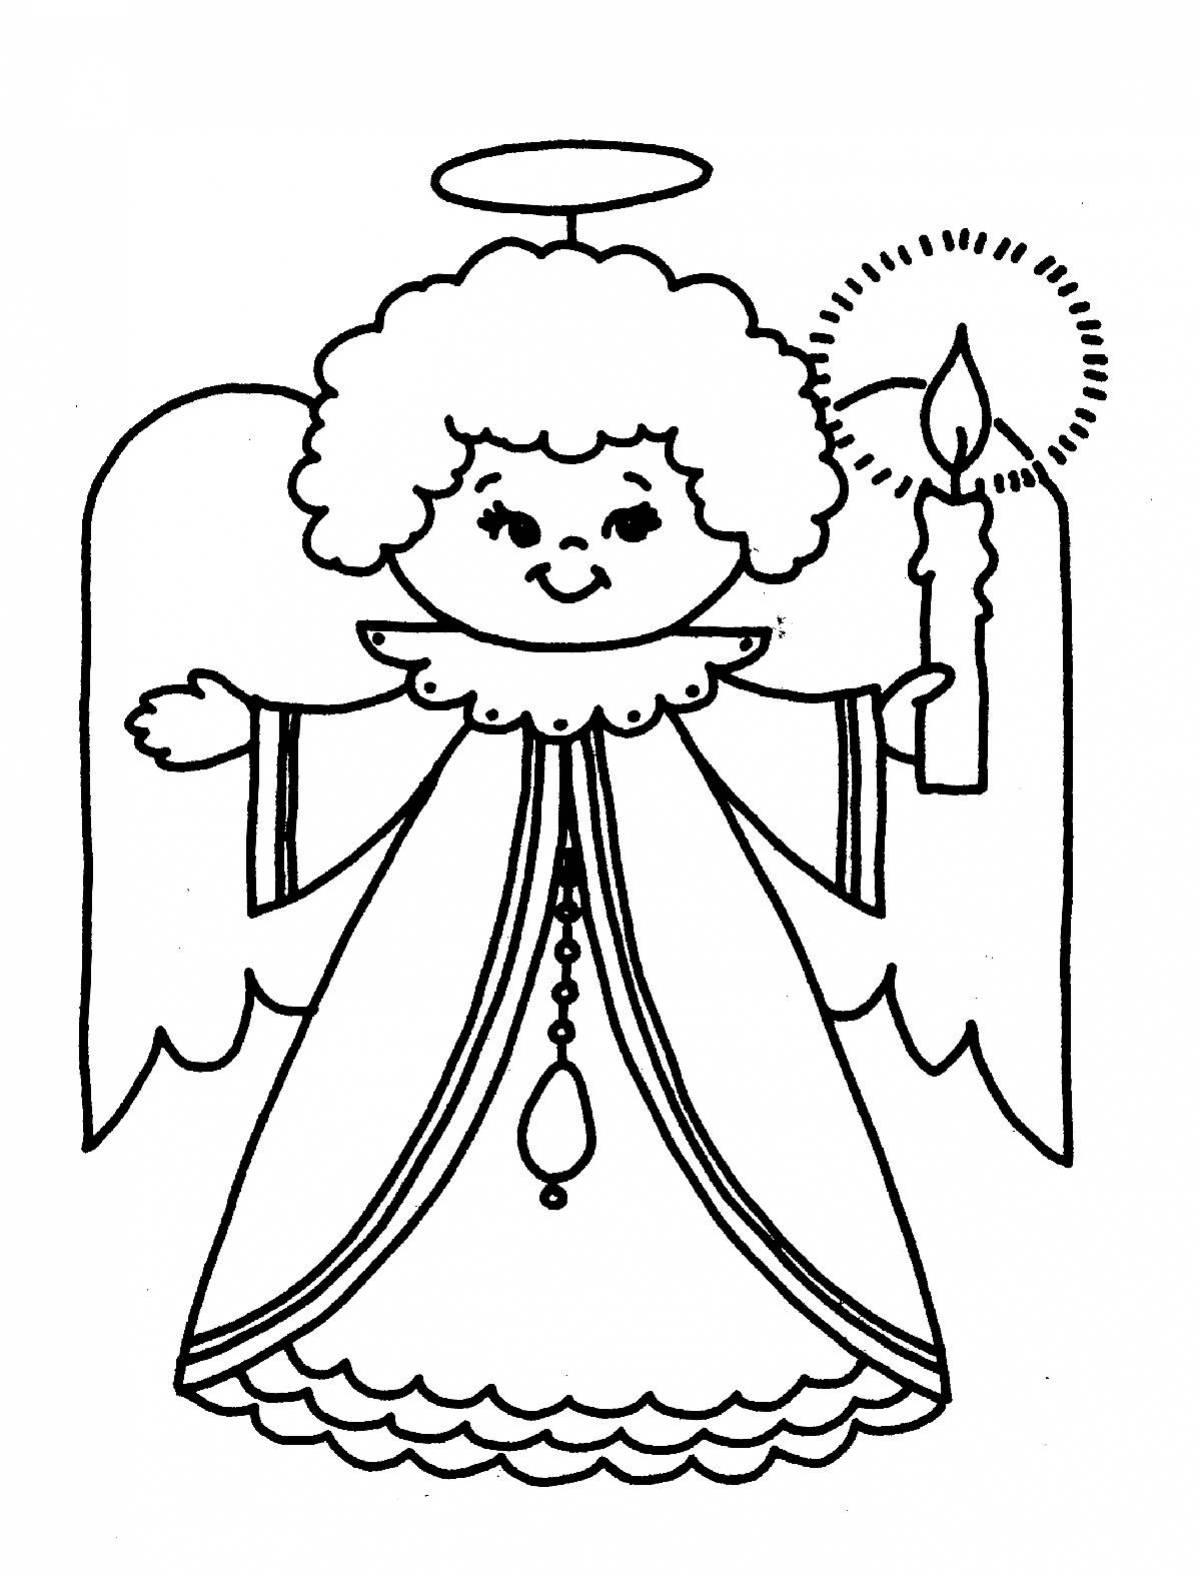 Gorgeous Christmas angel coloring page